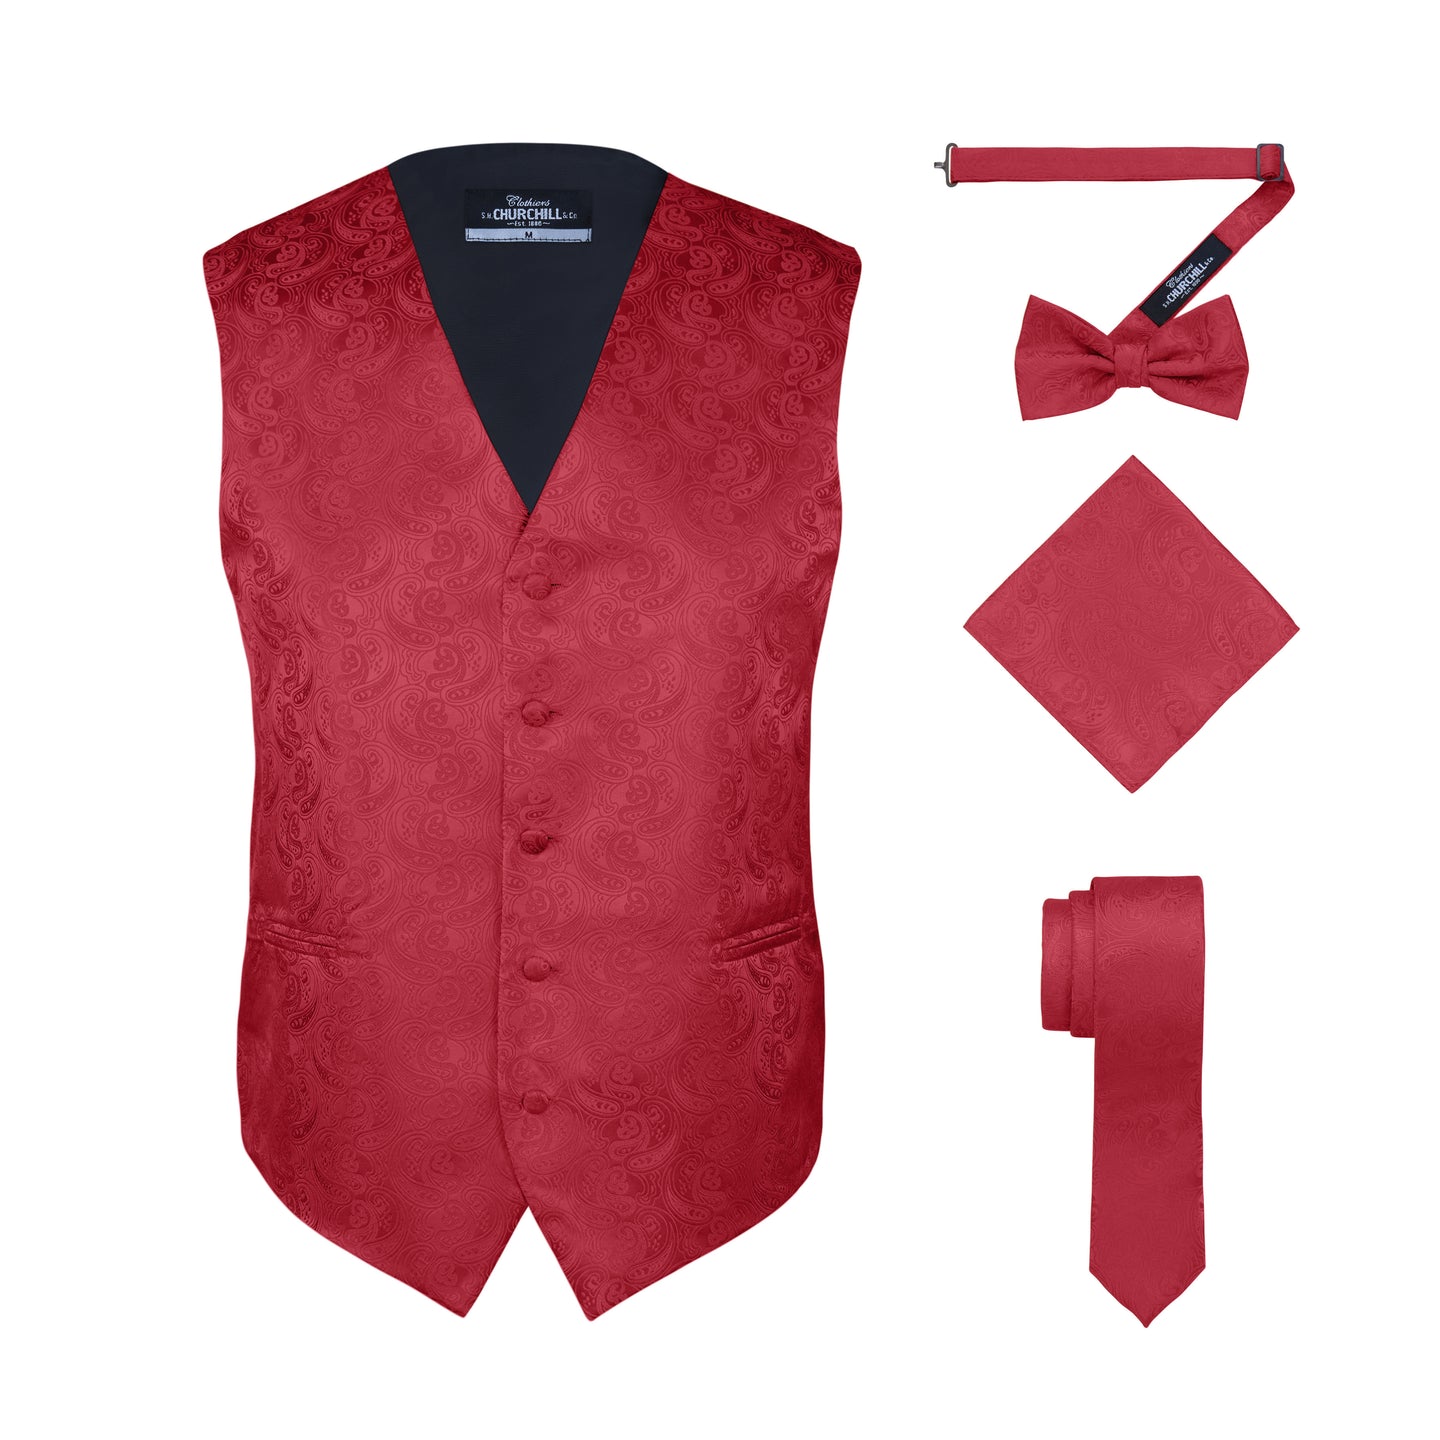 S.H. Churchill & Co. Men's Red Paisley Vest Set, with Bow Tie, Neck Tie and Pocket Hanky